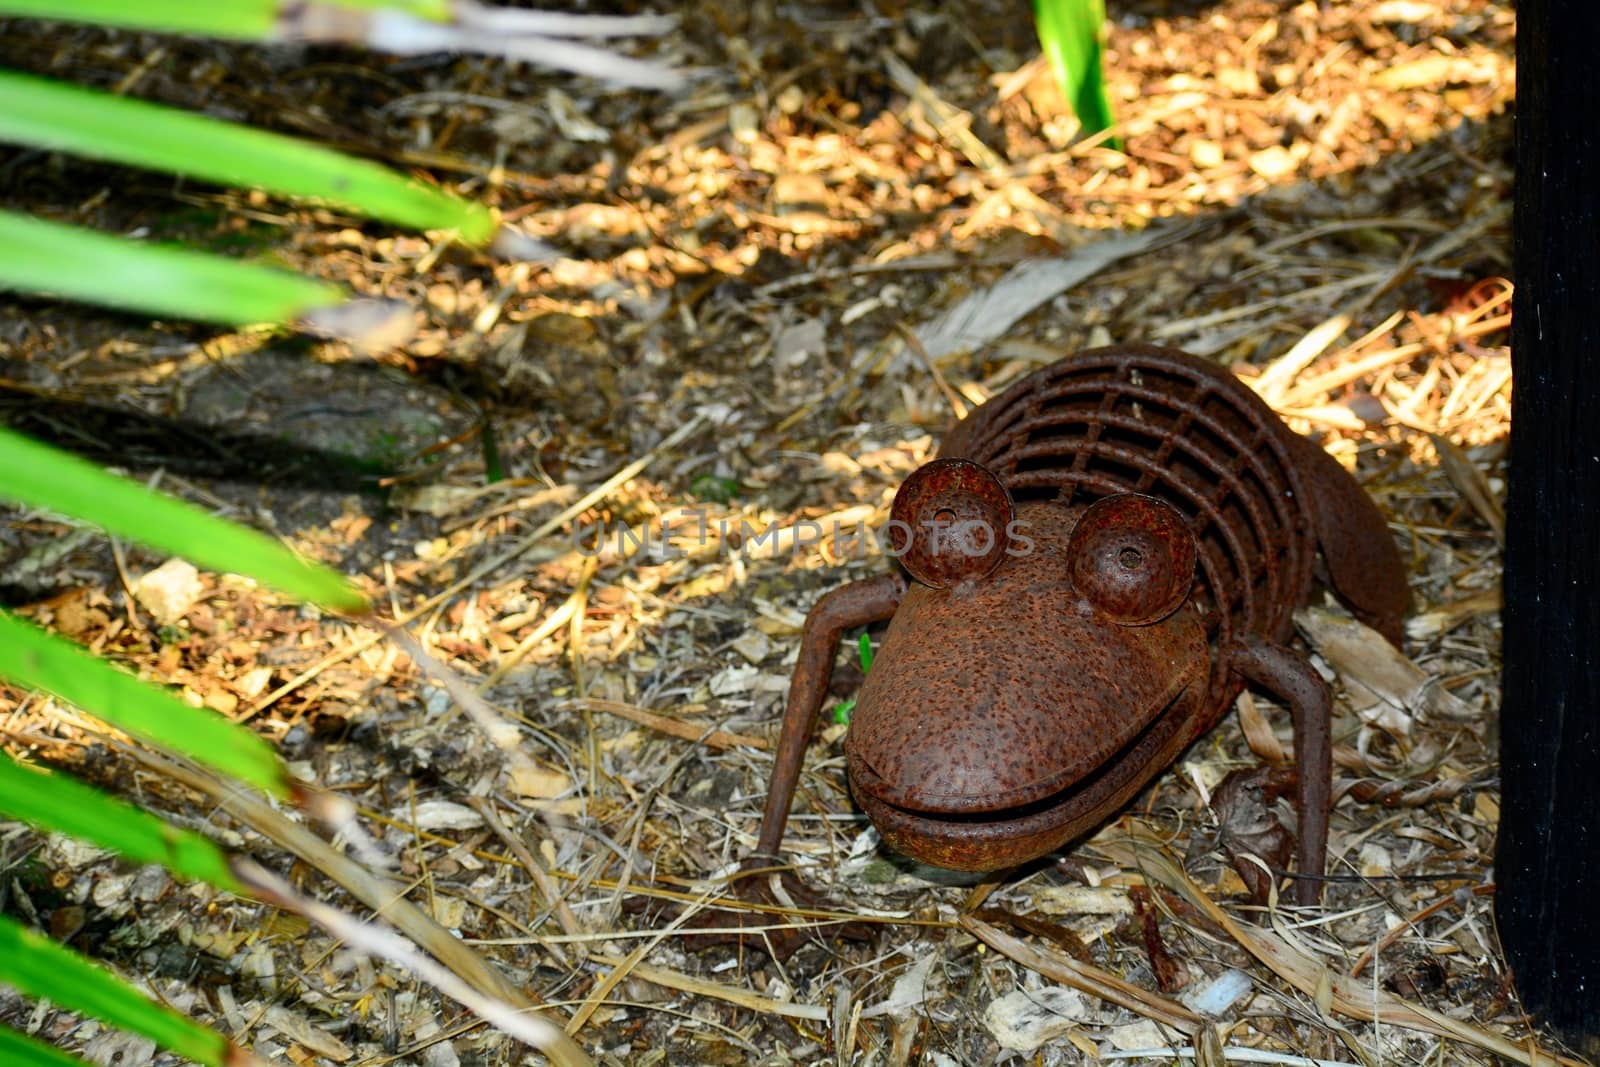 Matakana, New Zealand - Dec 2019: Sculptureum sculpture park. Peculiar modern sculpture made of rusty wire and some metal parts, representing a small crocodile hiding in the grass. by Marshalkina